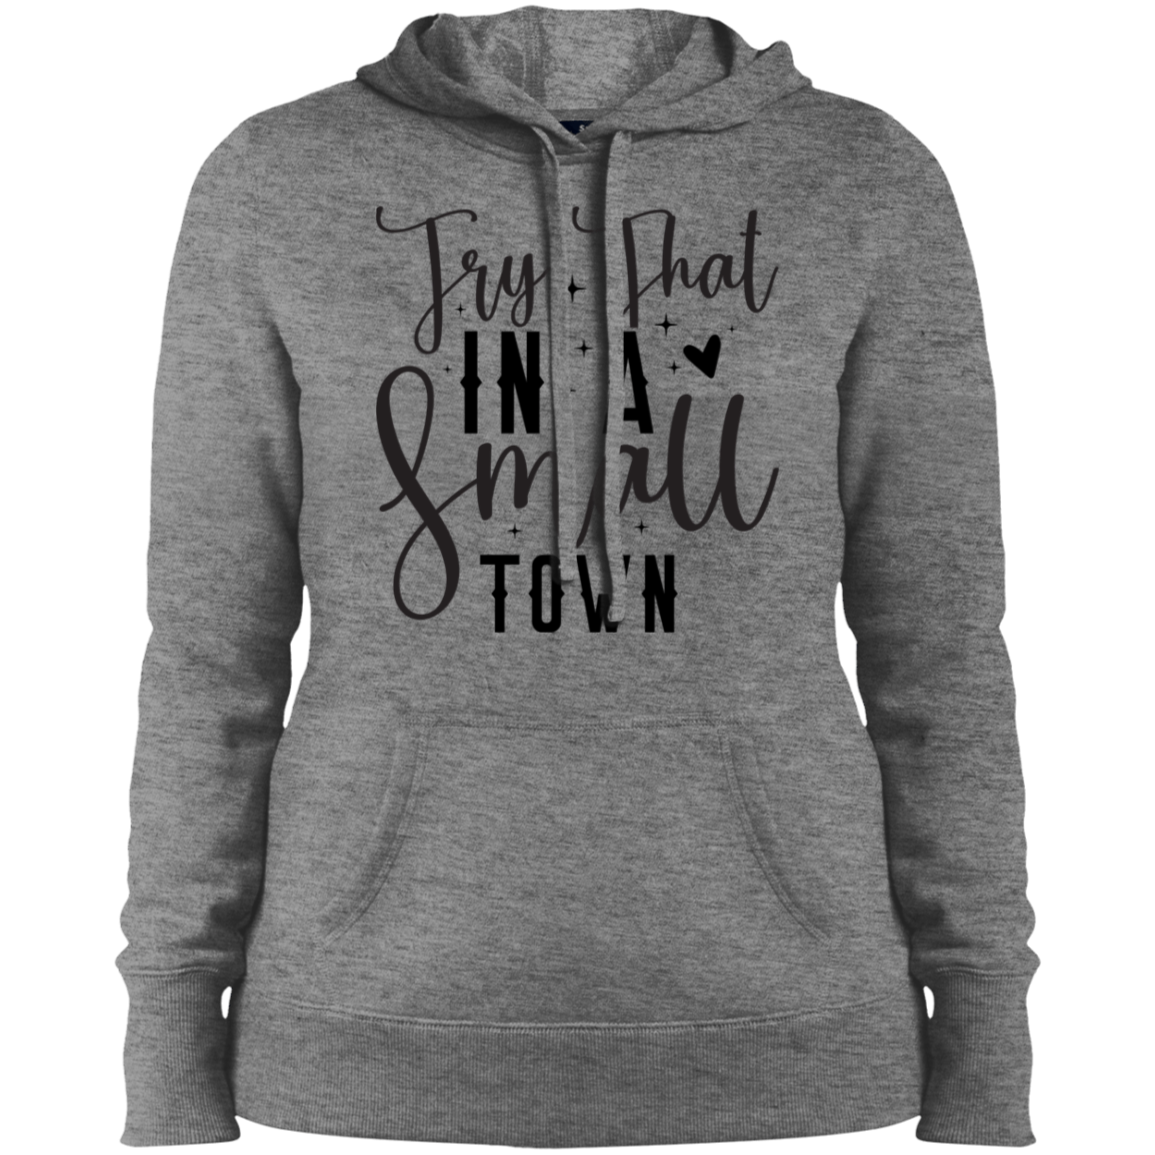 Try That in  Small Town | Ladies' Pullover Hooded Sweatshirt